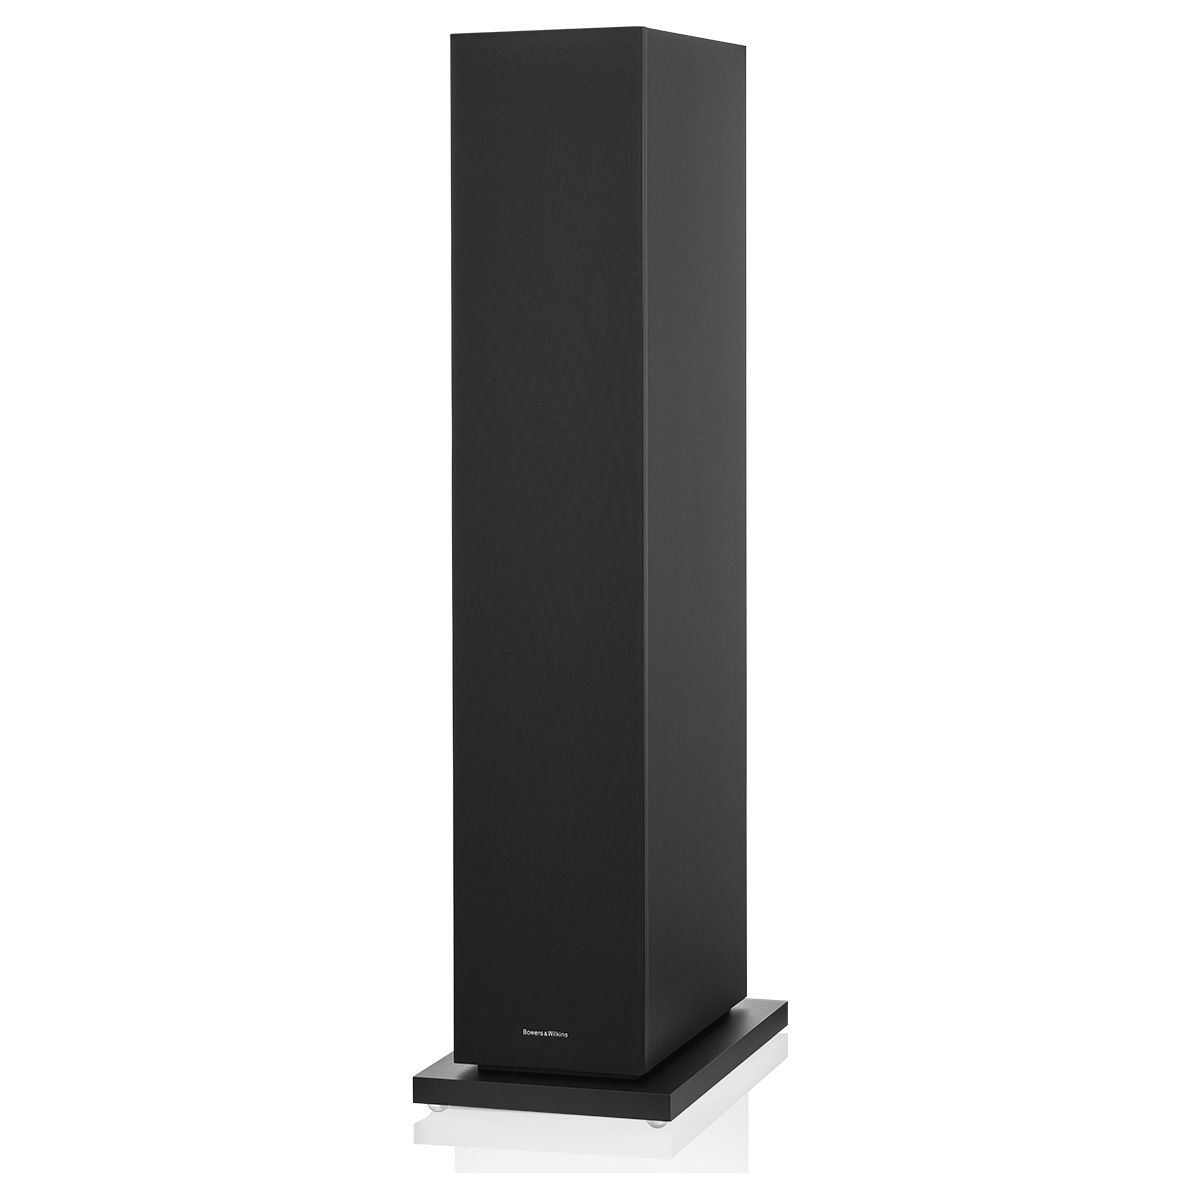 Bowers & Wilkins 603 S3 Floorstanding Speaker at an angle in Black - with grille